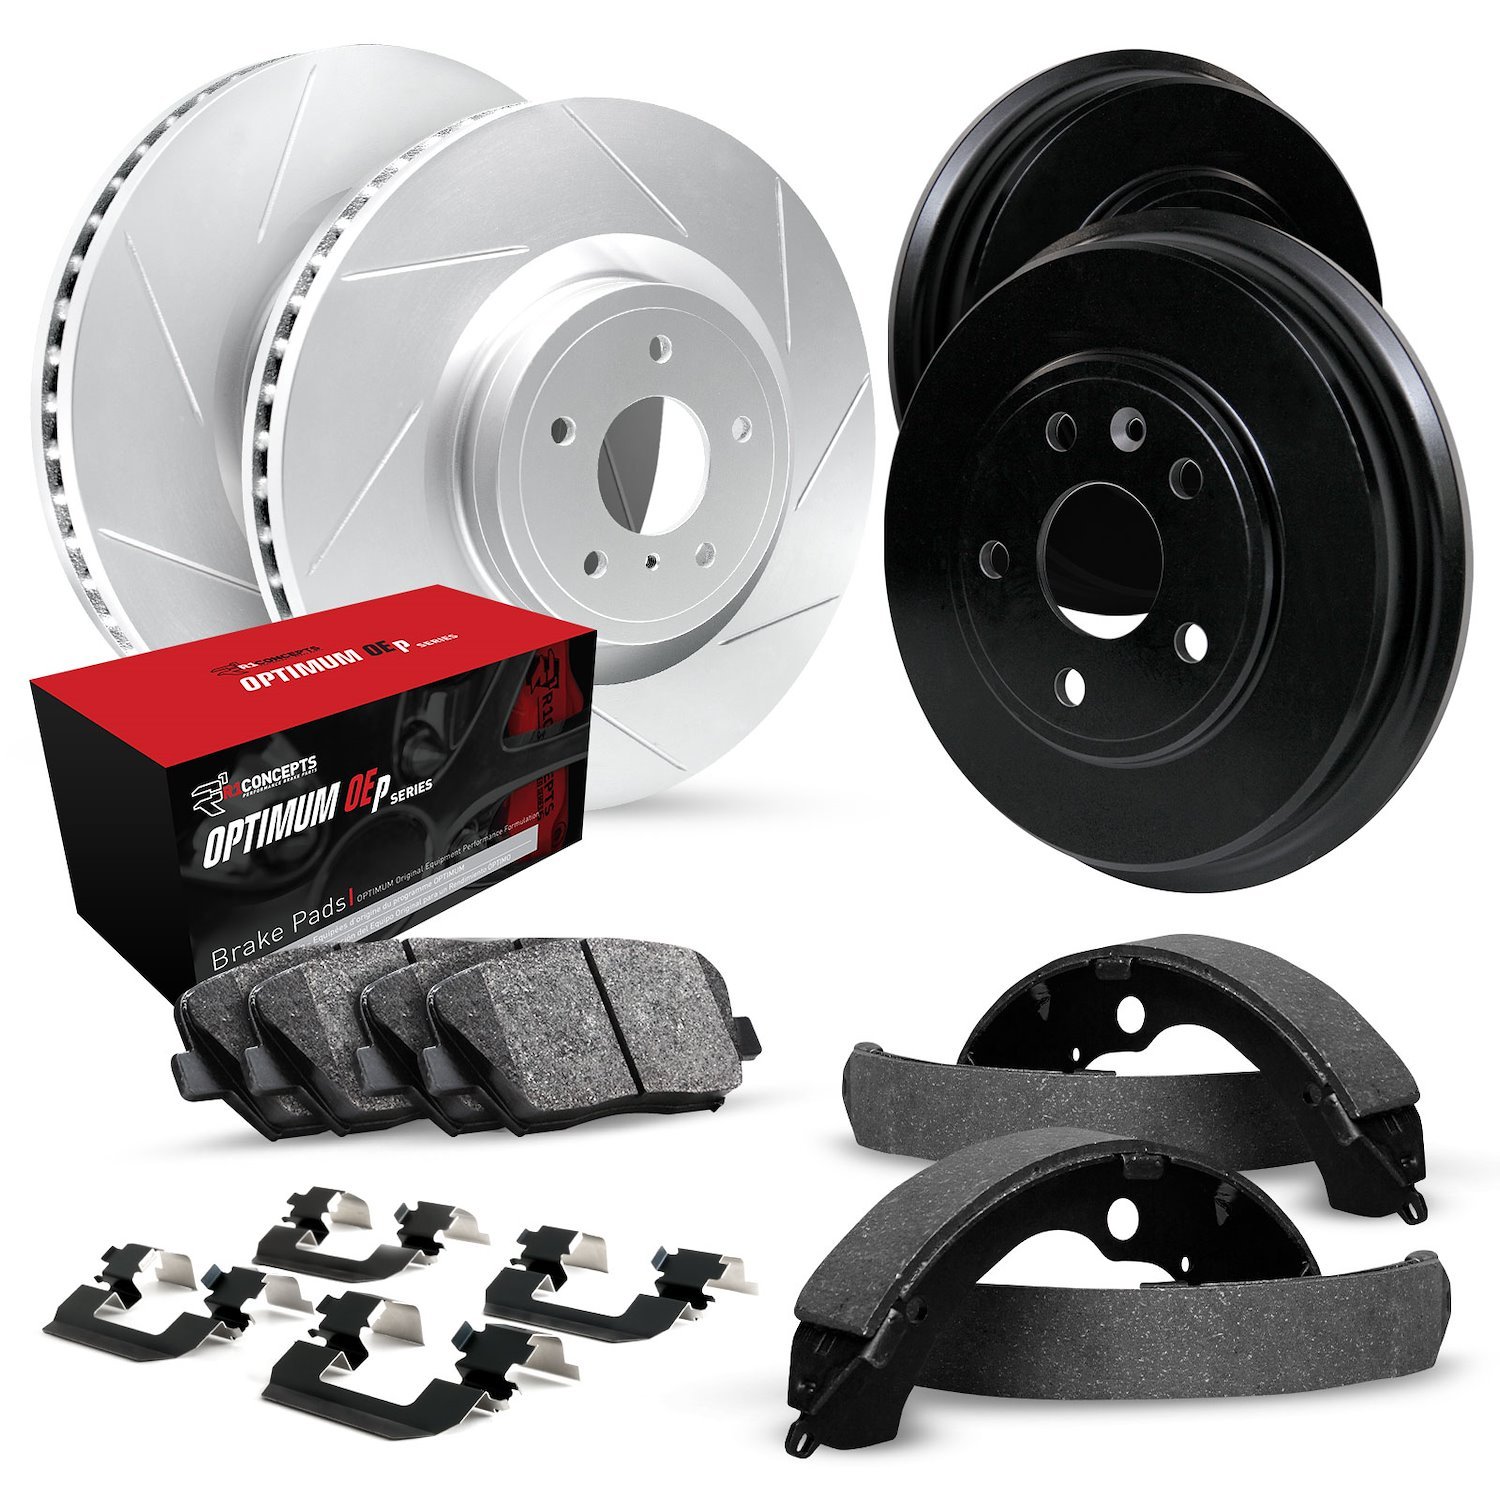 GEO-Carbon Slotted Brake Rotor & Drum Set w/Optimum OE Pads, Shoes, & Hardware, 1967-1967 Ford/Lincoln/Mercury/Mazda